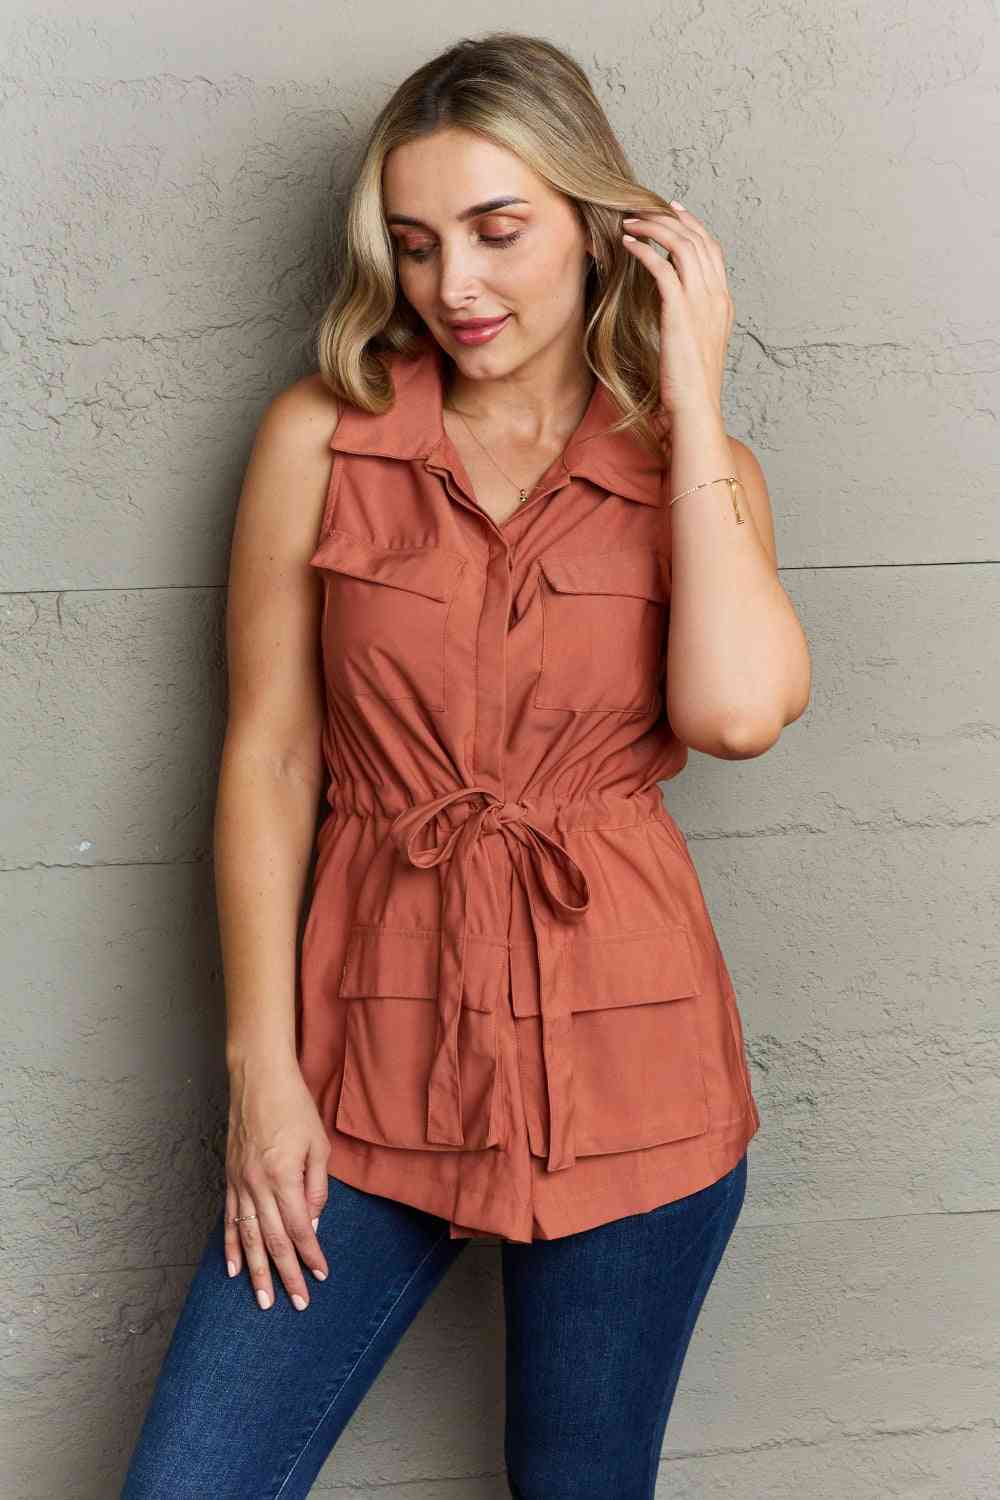 Follow The Light Sleeveless Collared Button Down Top - Red / S - Camis & Tops - Shirts & Tops - 1 - 2024